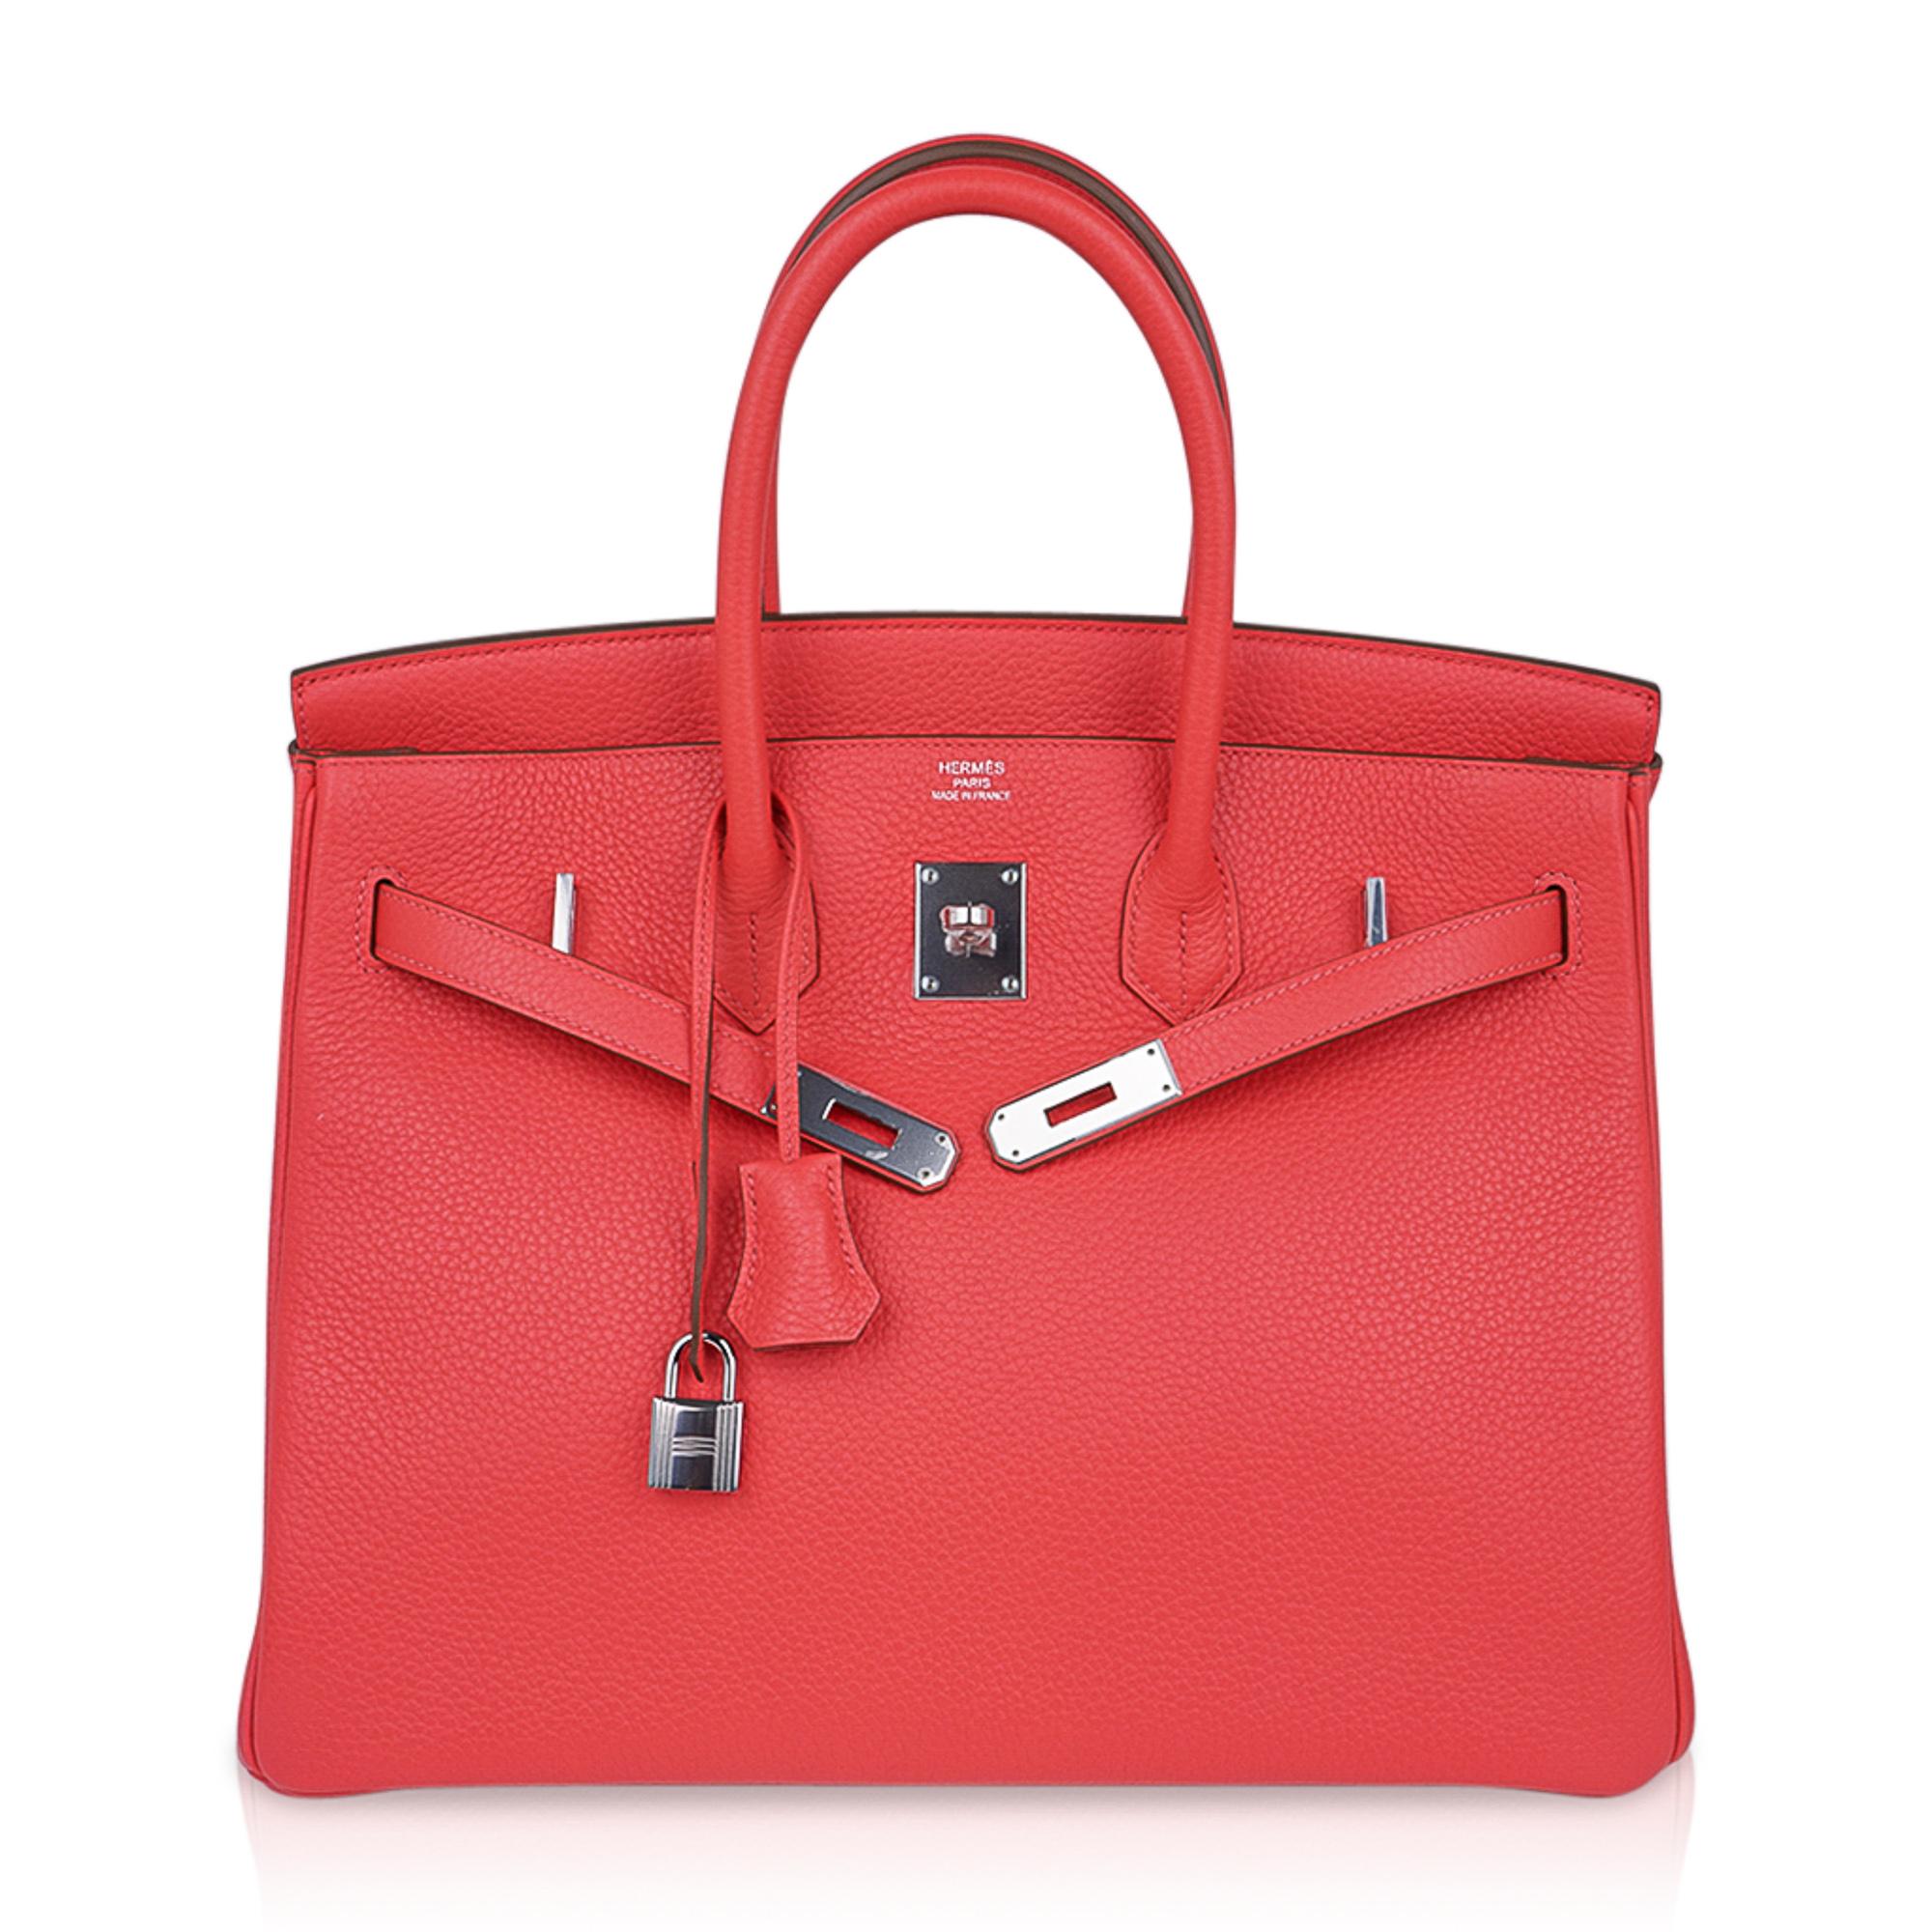 Hermes Birkin 35 Rose Jaipur Pink Bag Clemence Leather Palladium Hardware  In New Condition For Sale In Miami, FL